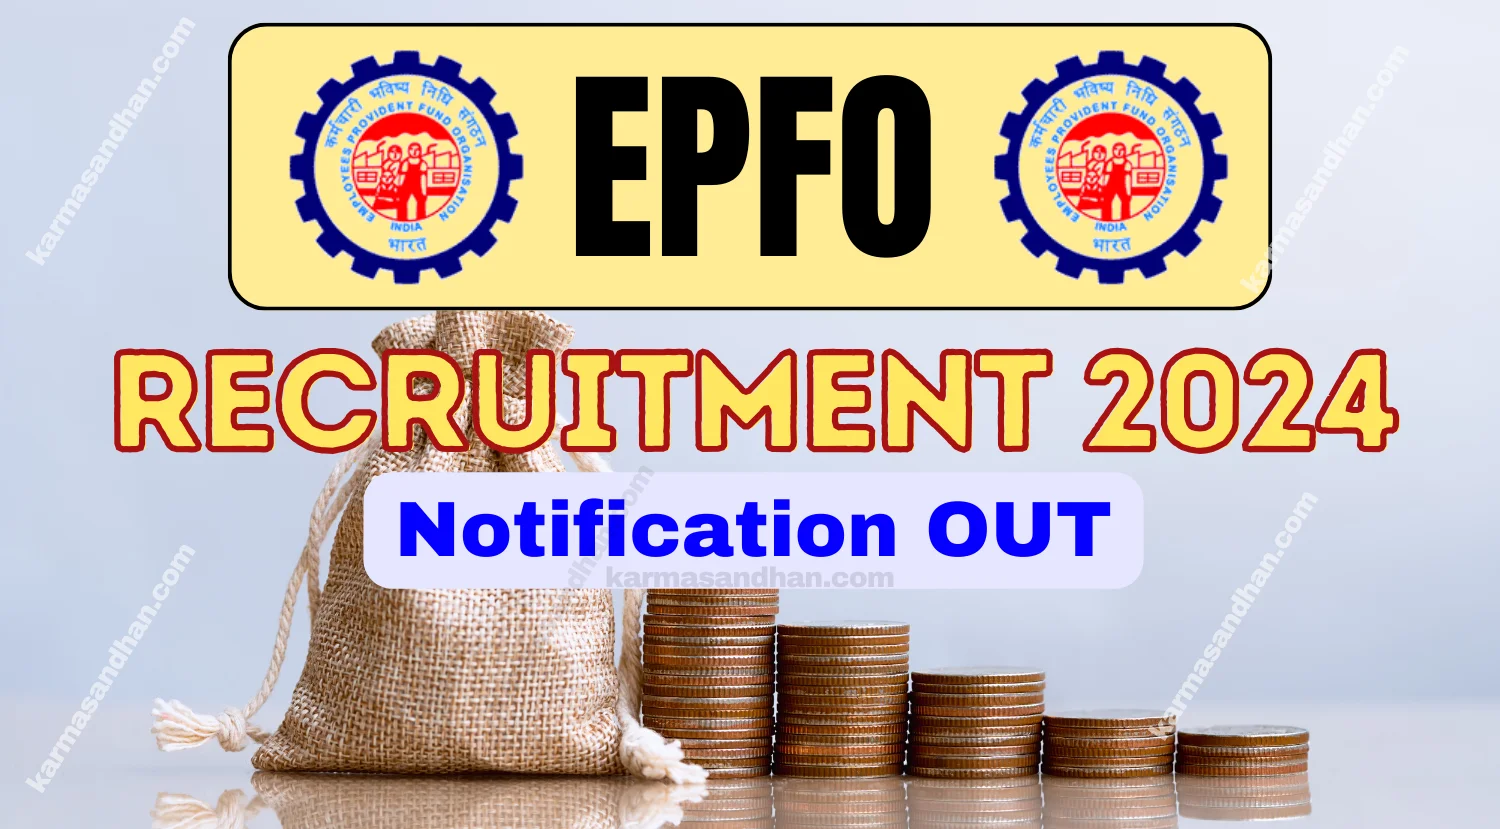 EPFO Recruitment 2024 Notification Out for Information Services Cadre